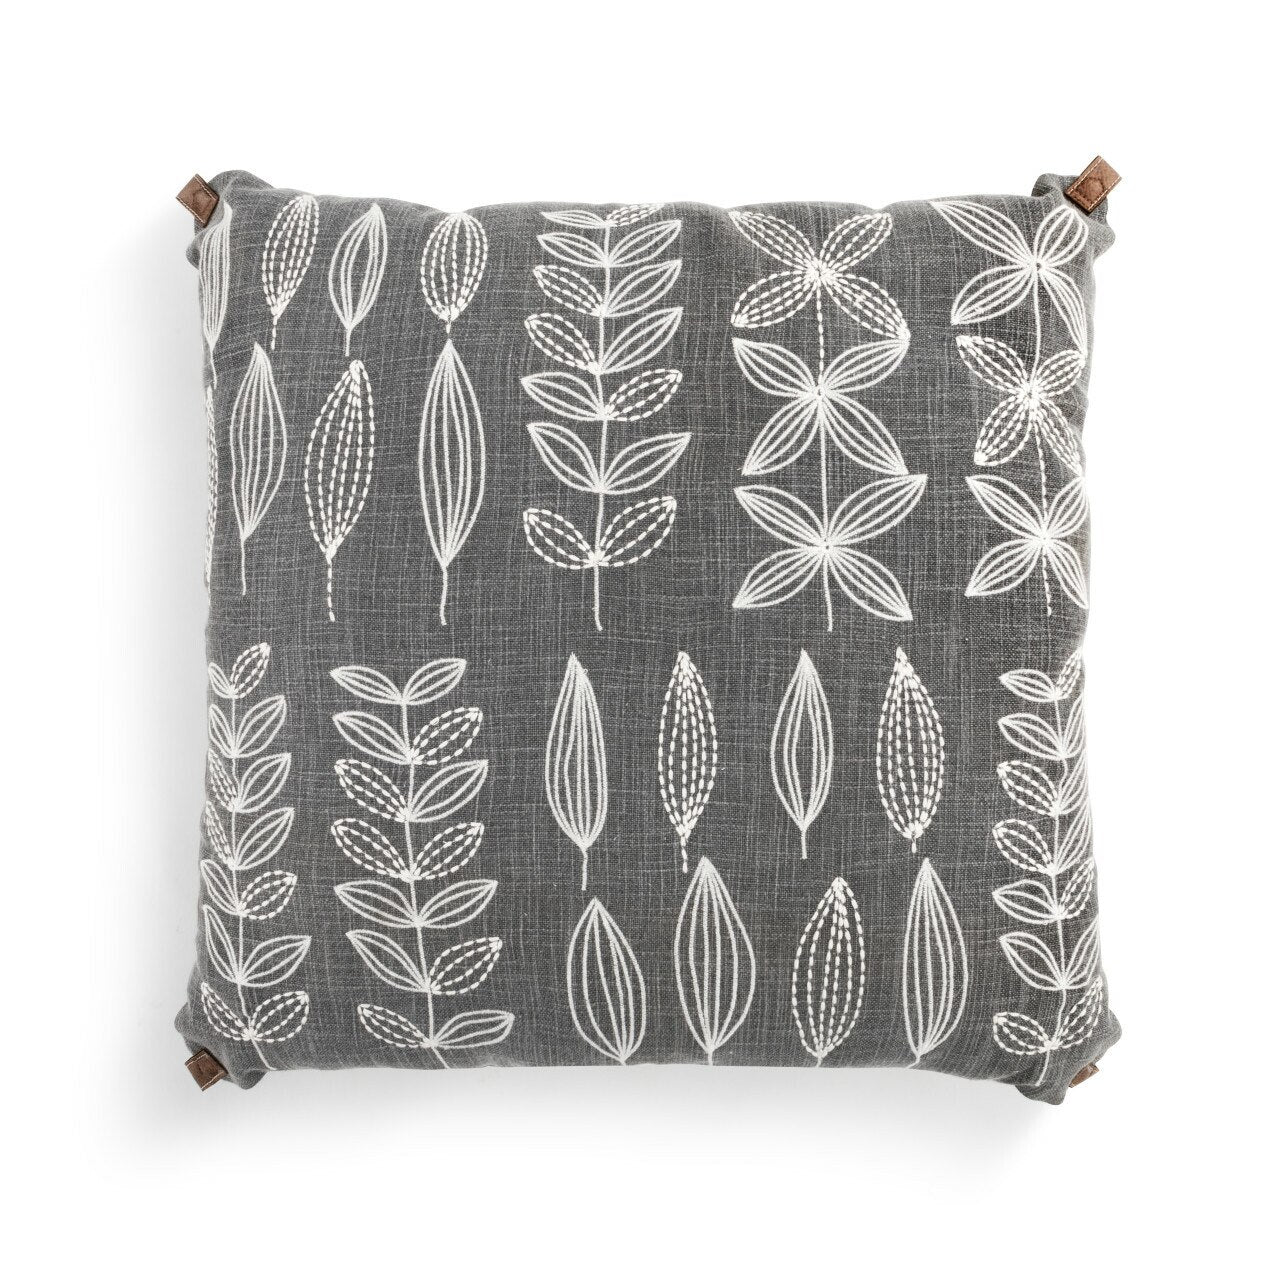 Embroidered gray leaf pillow